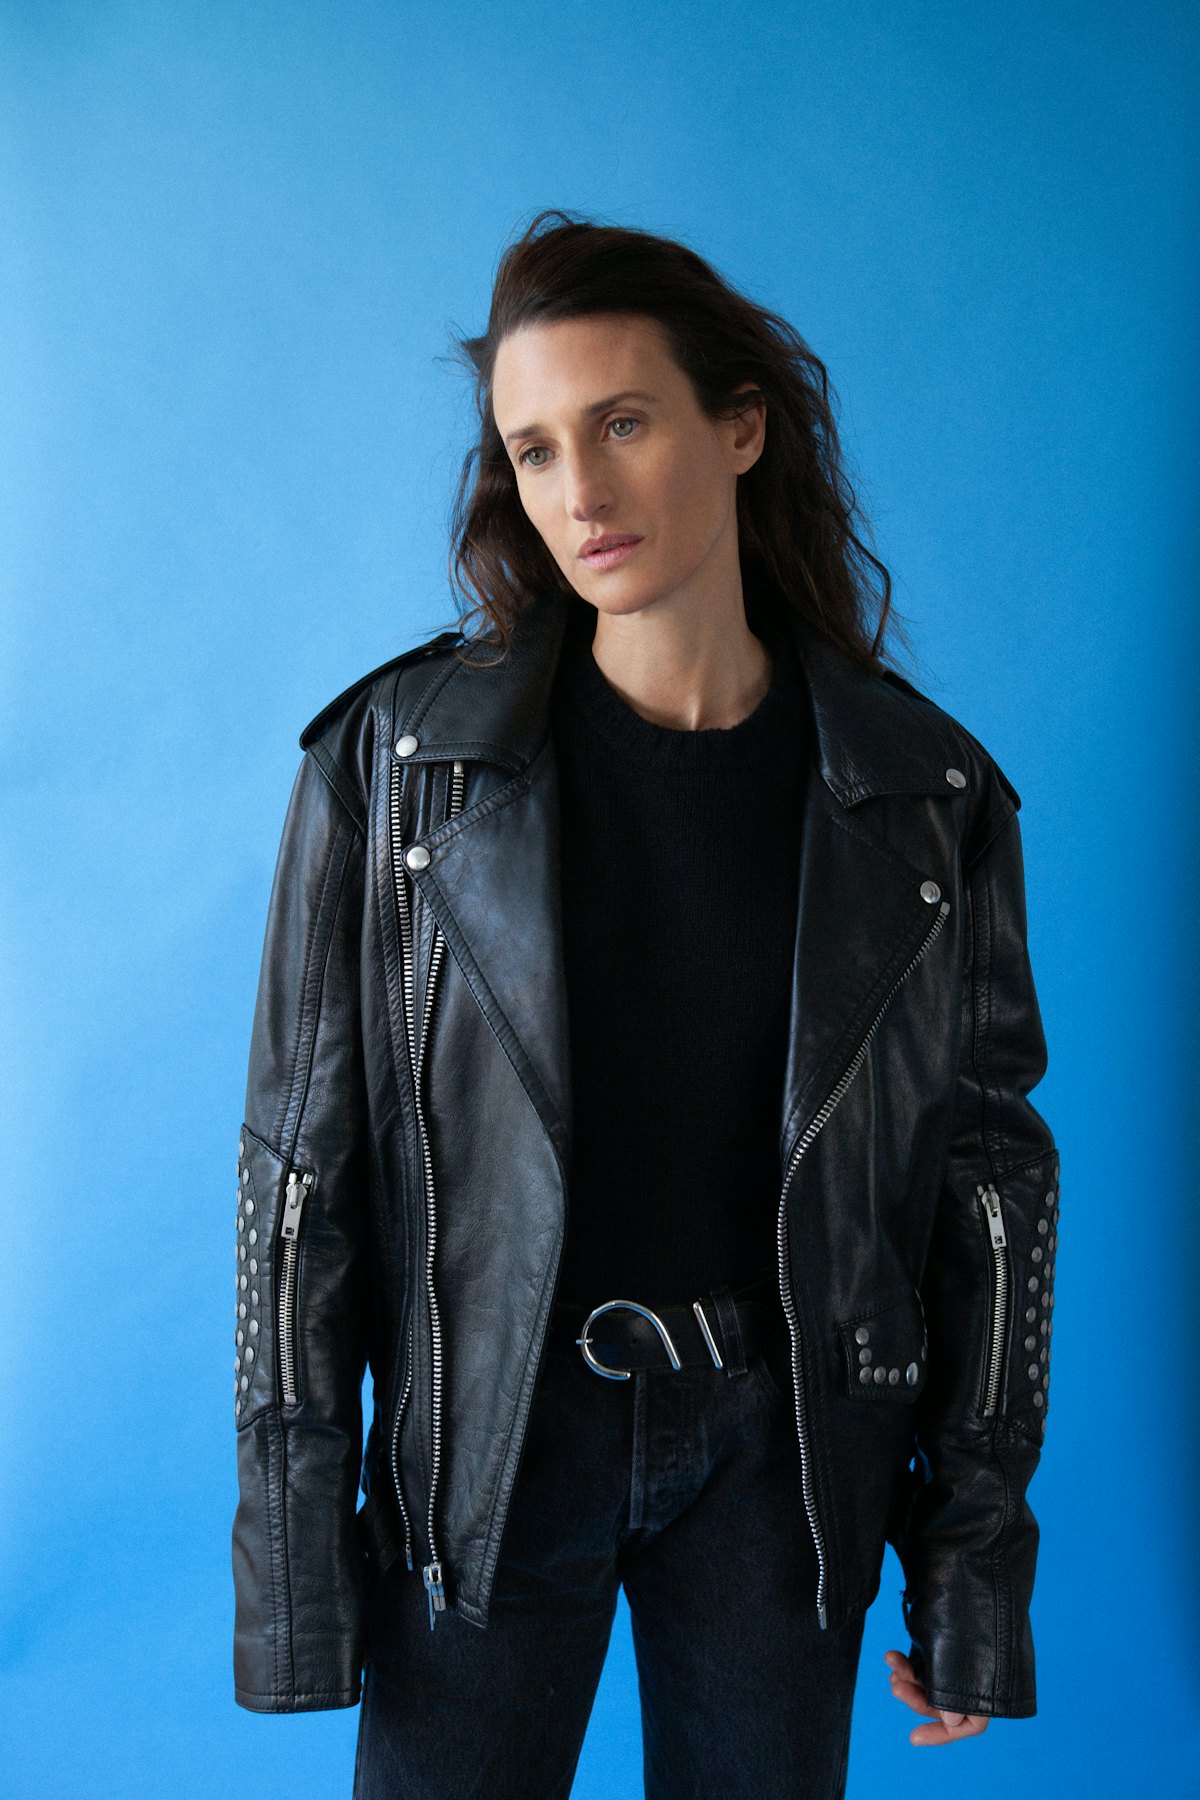 camille cottin in a leather jacket